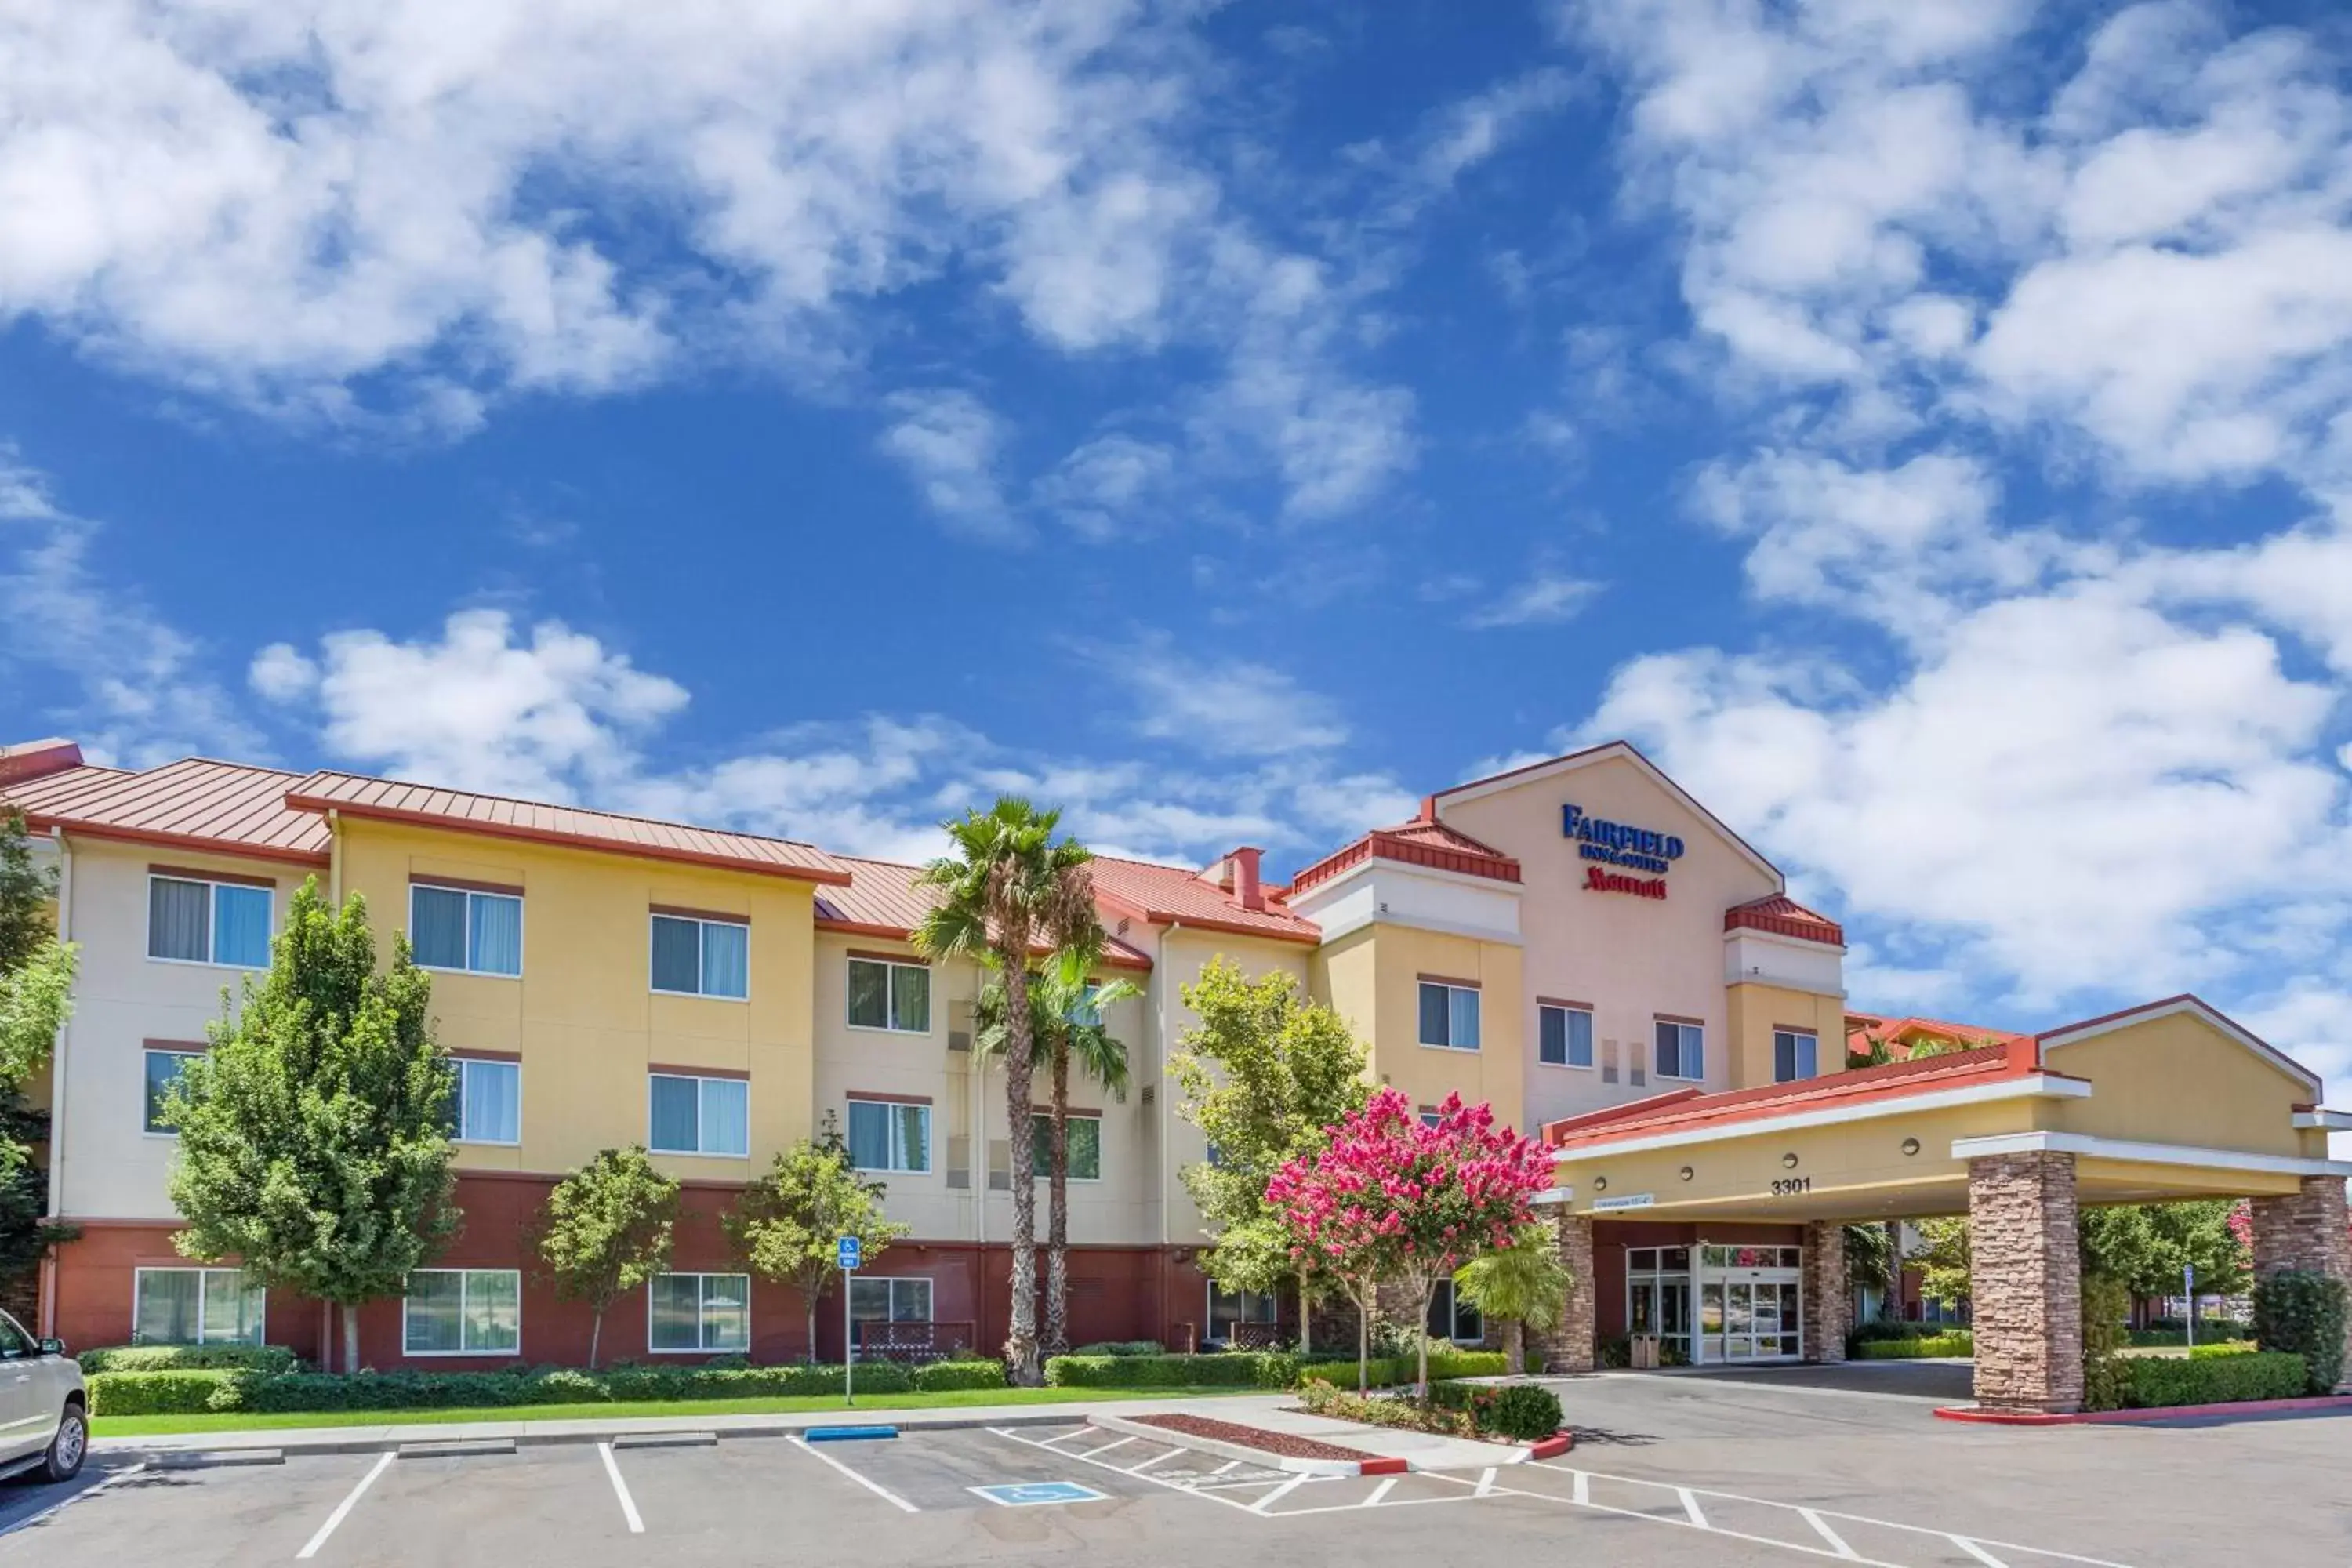 Property Building in Fairfield Inn and Suites Turlock